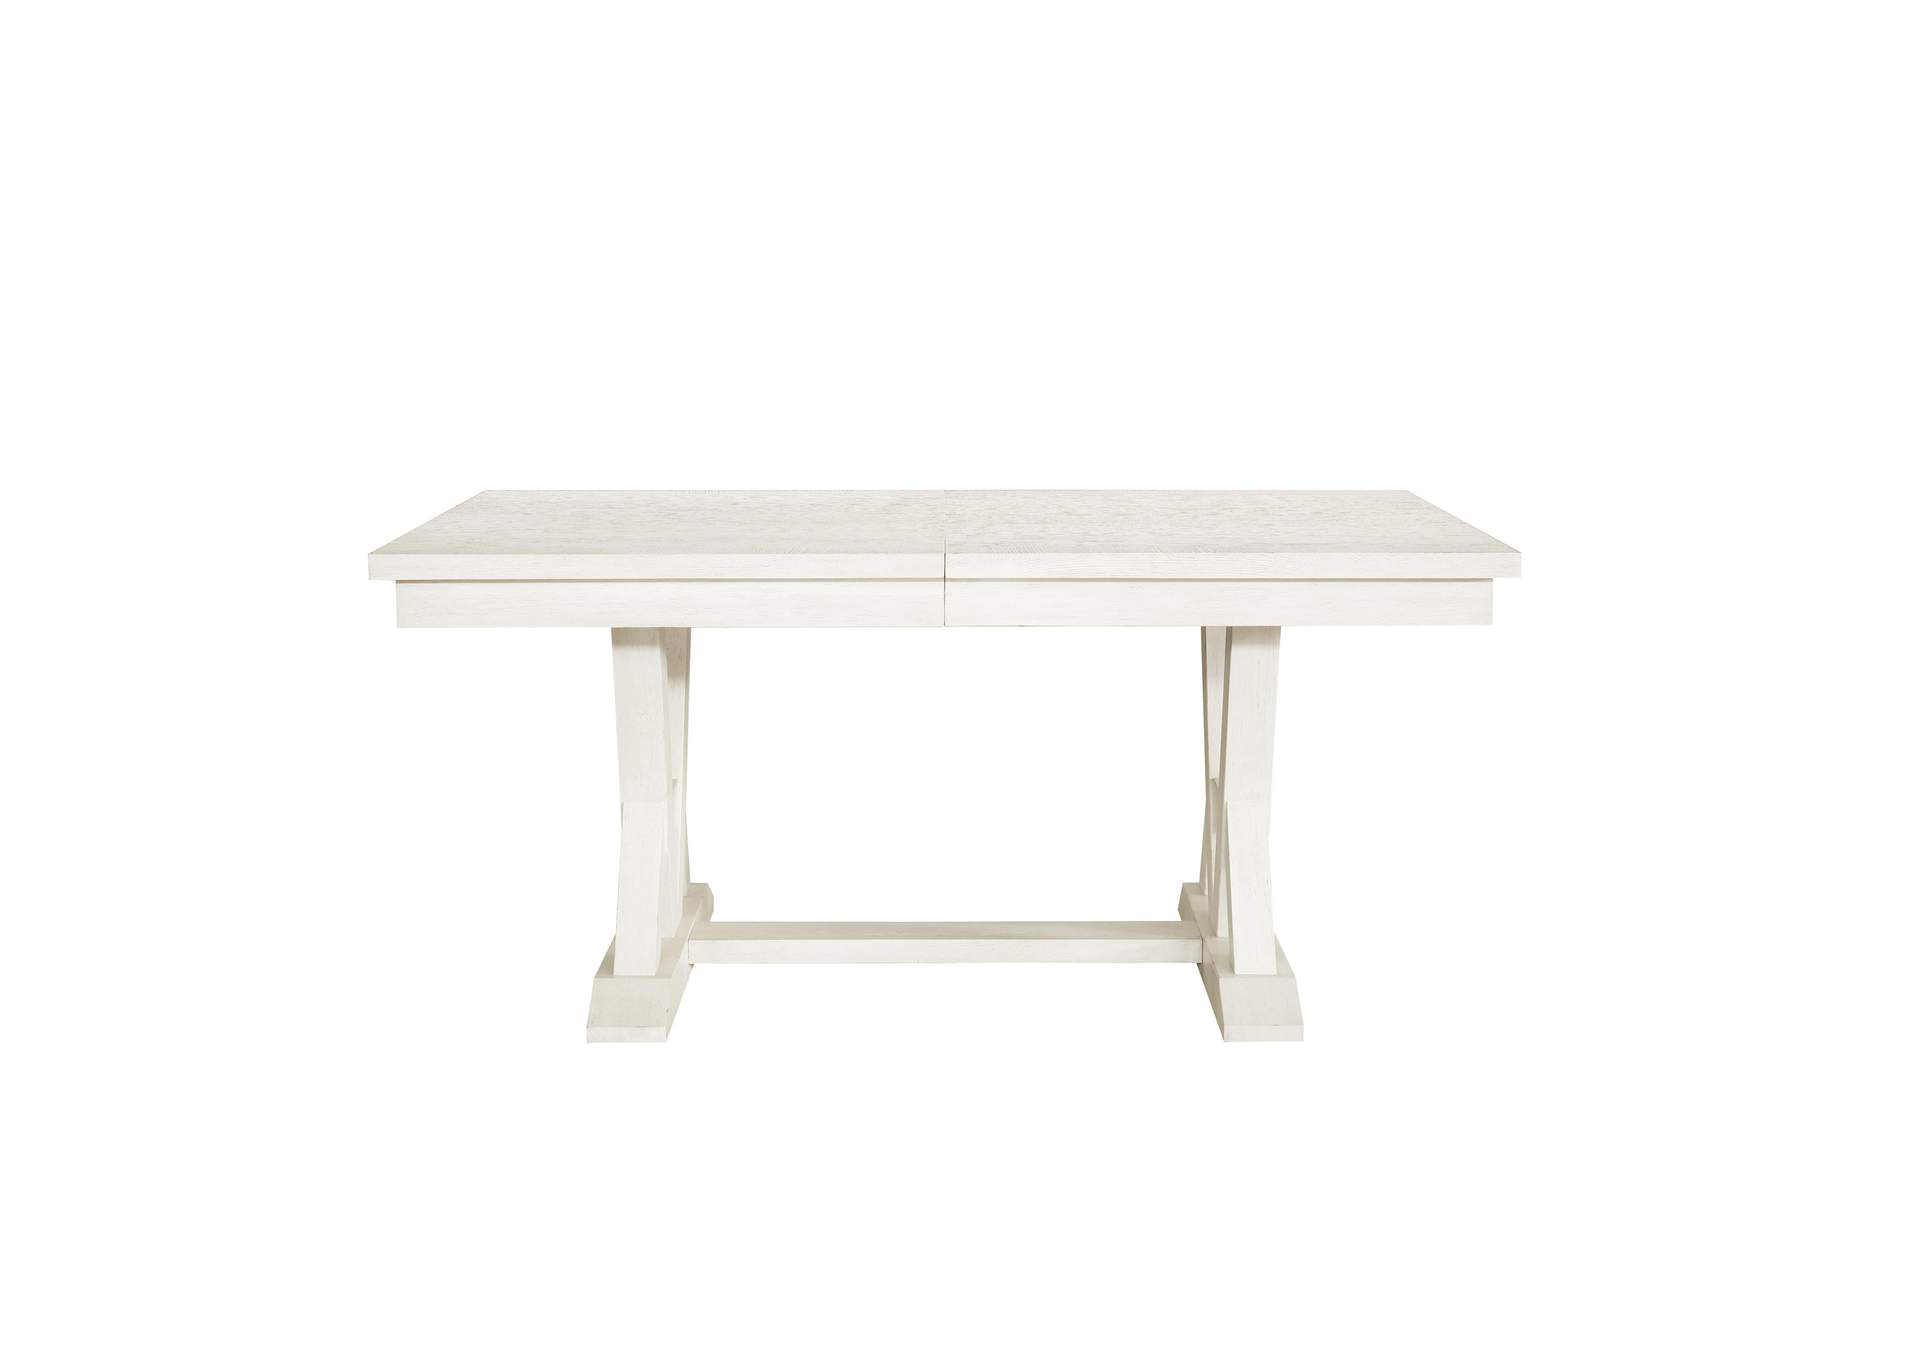 Maggie Valley Trestle Table with Extension Leaf,Pulaski Furniture